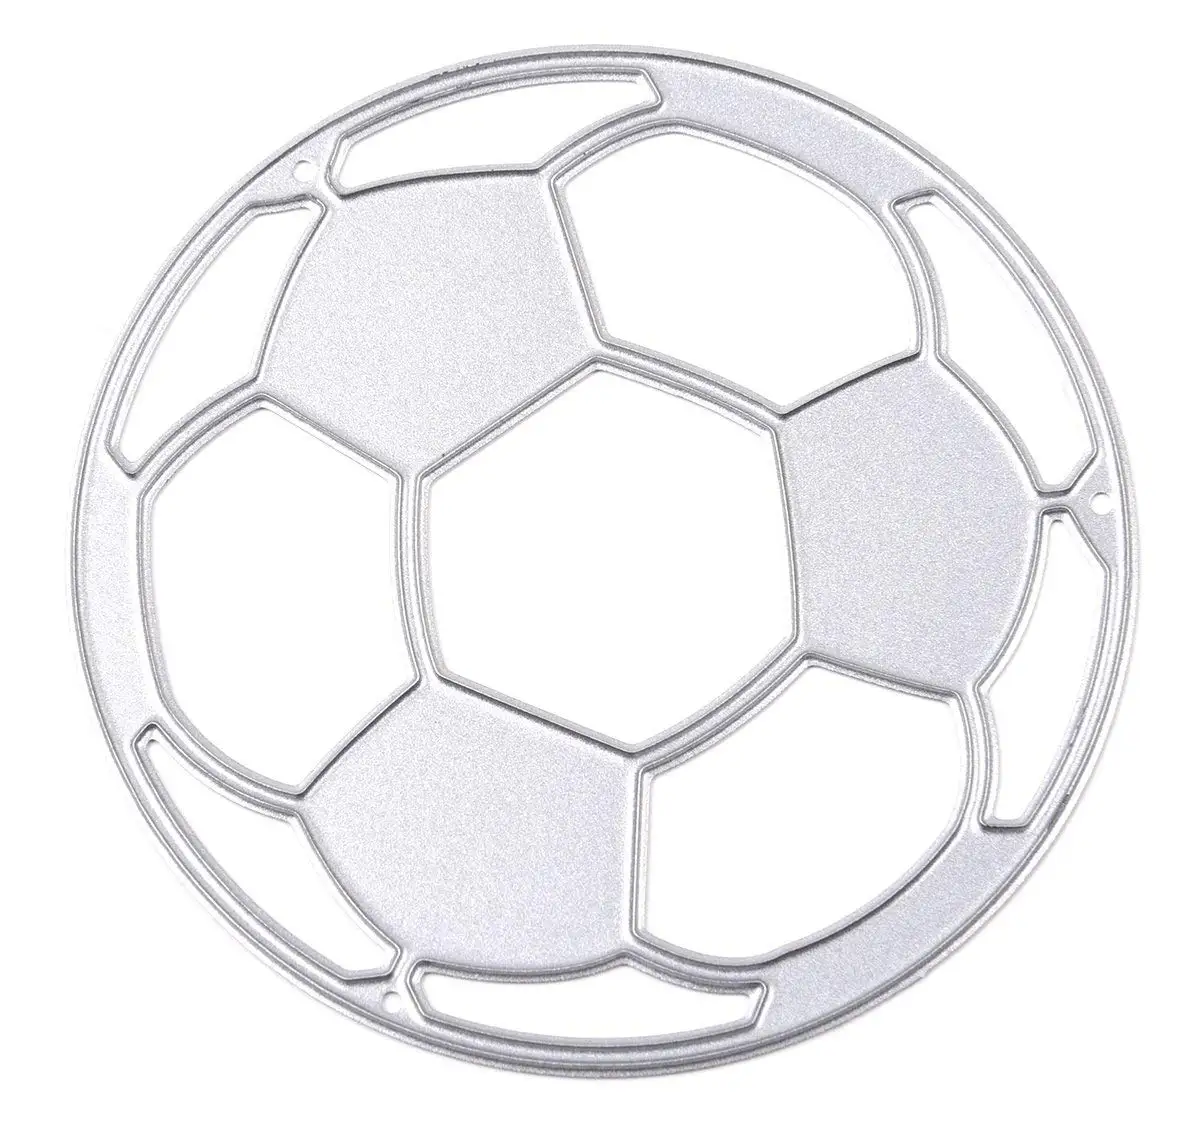 Cheap Football Template, find Football Template deals on line at